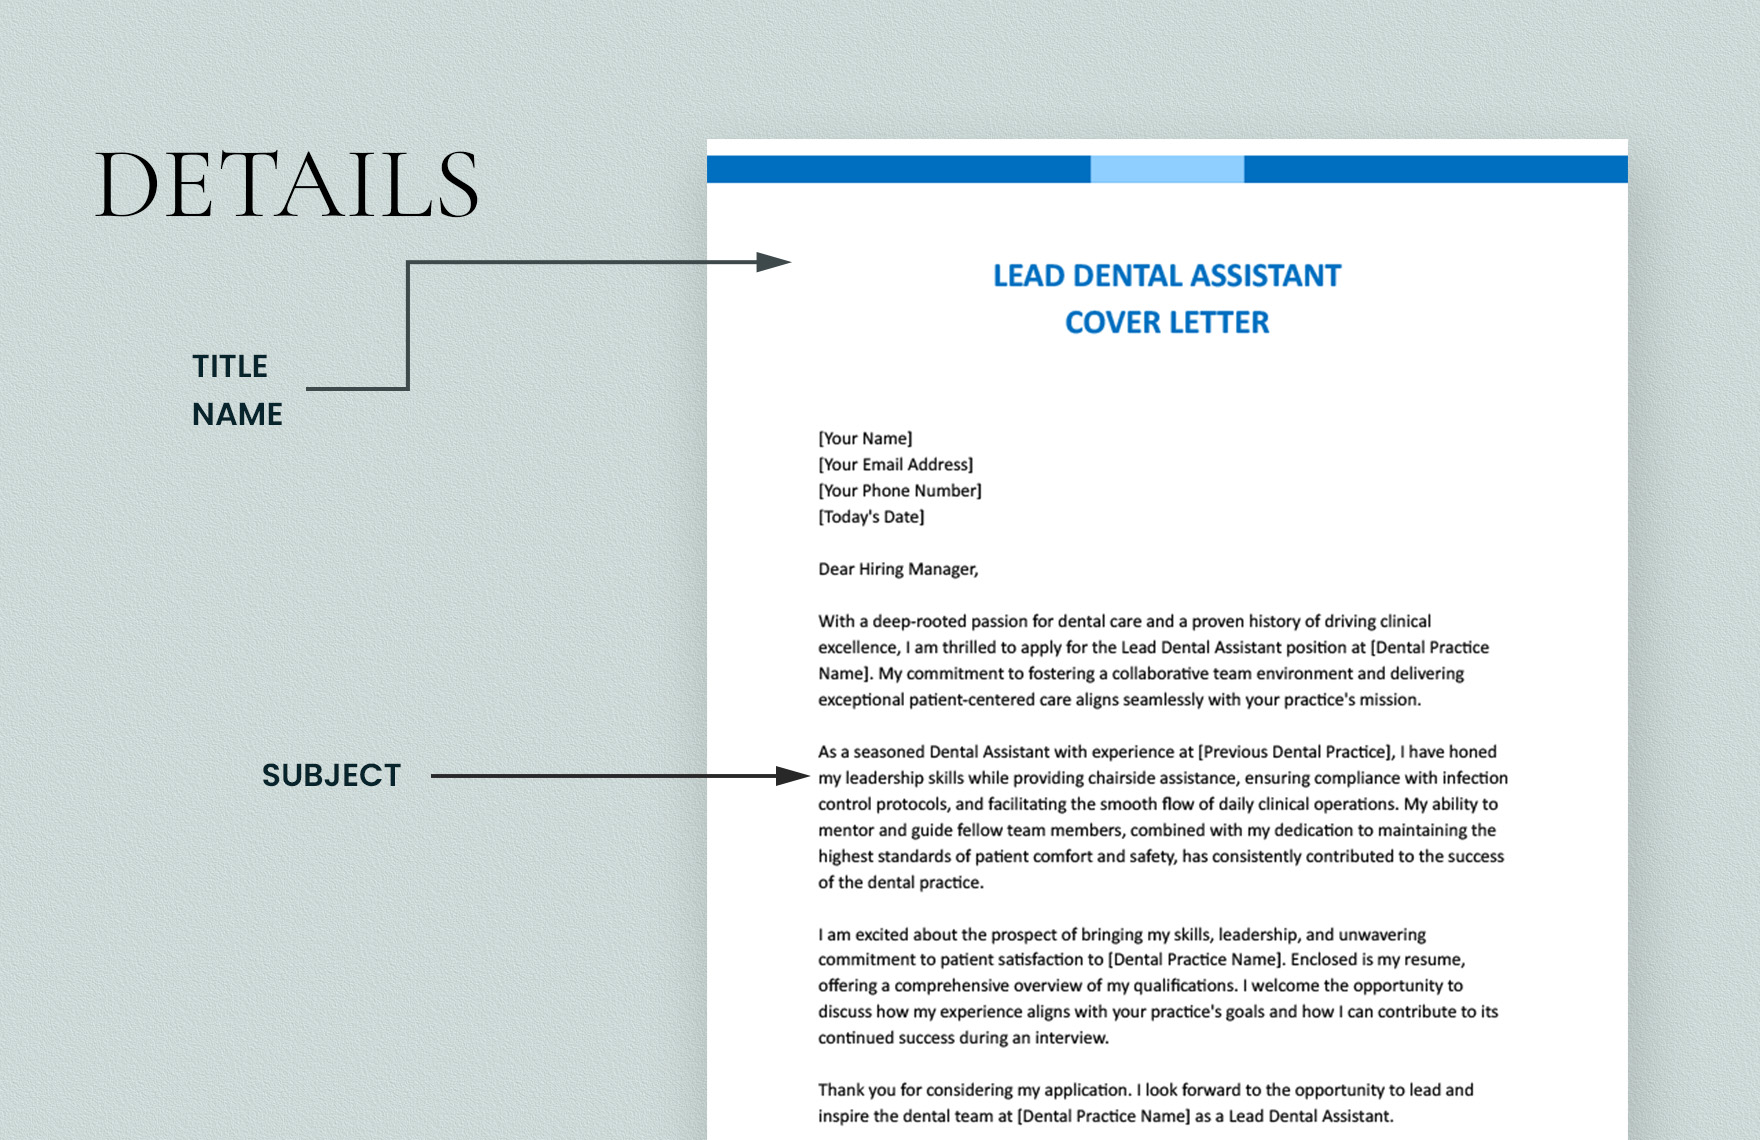 Lead Dental Assistant Cover Letter